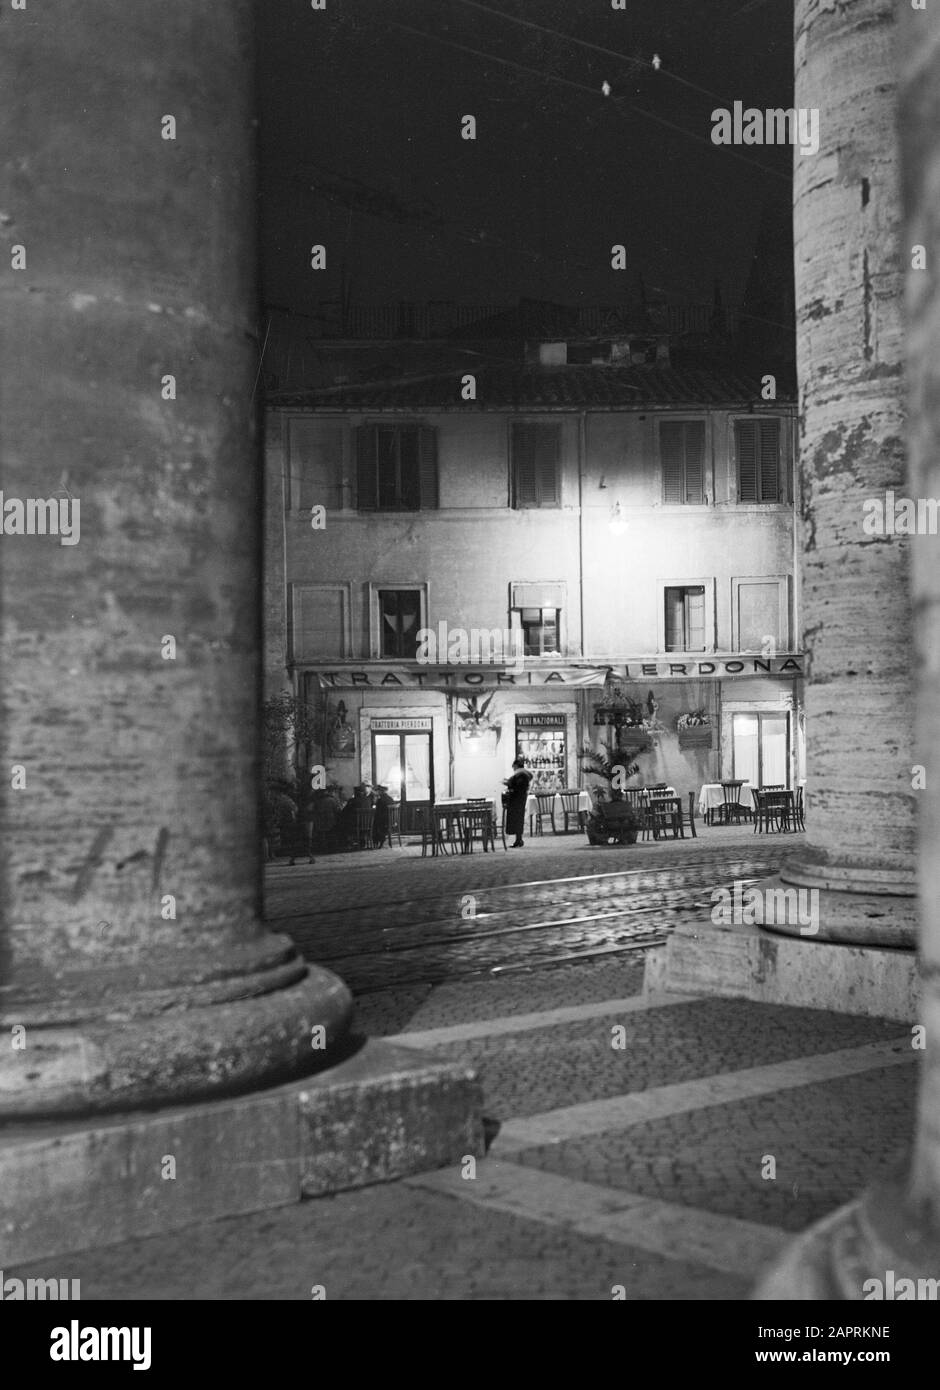 Rome: Visit to the Vatican City  A small restaurant opposite St. Peter's from the Doric Pillars Date: December 1937 Location: Italy, Rome, St. Peter's Square, Vatican City Keywords: evening, pillars, squares, restaurants, street images Institution name: Saint Pieter Stock Photo